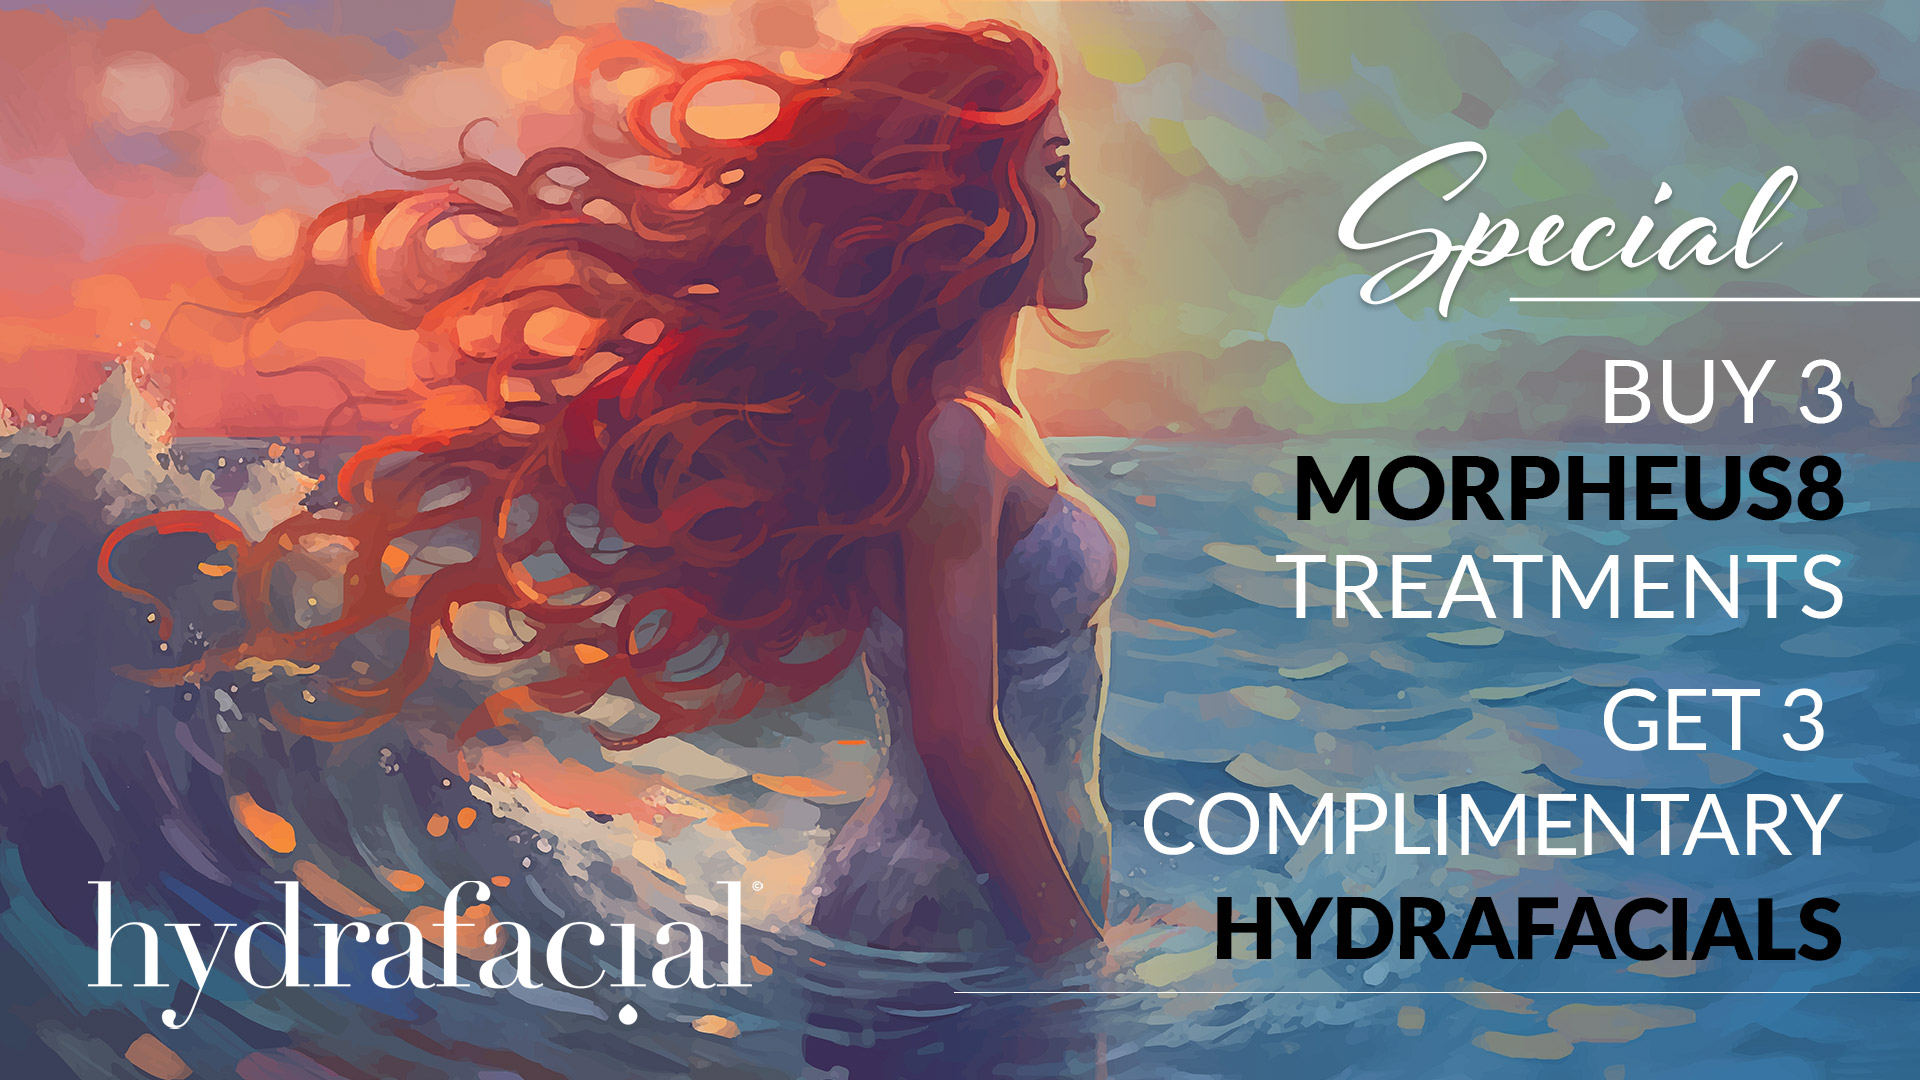 Needs to know how buy 3 morpheus8 treatments get 3 hydrafacials free